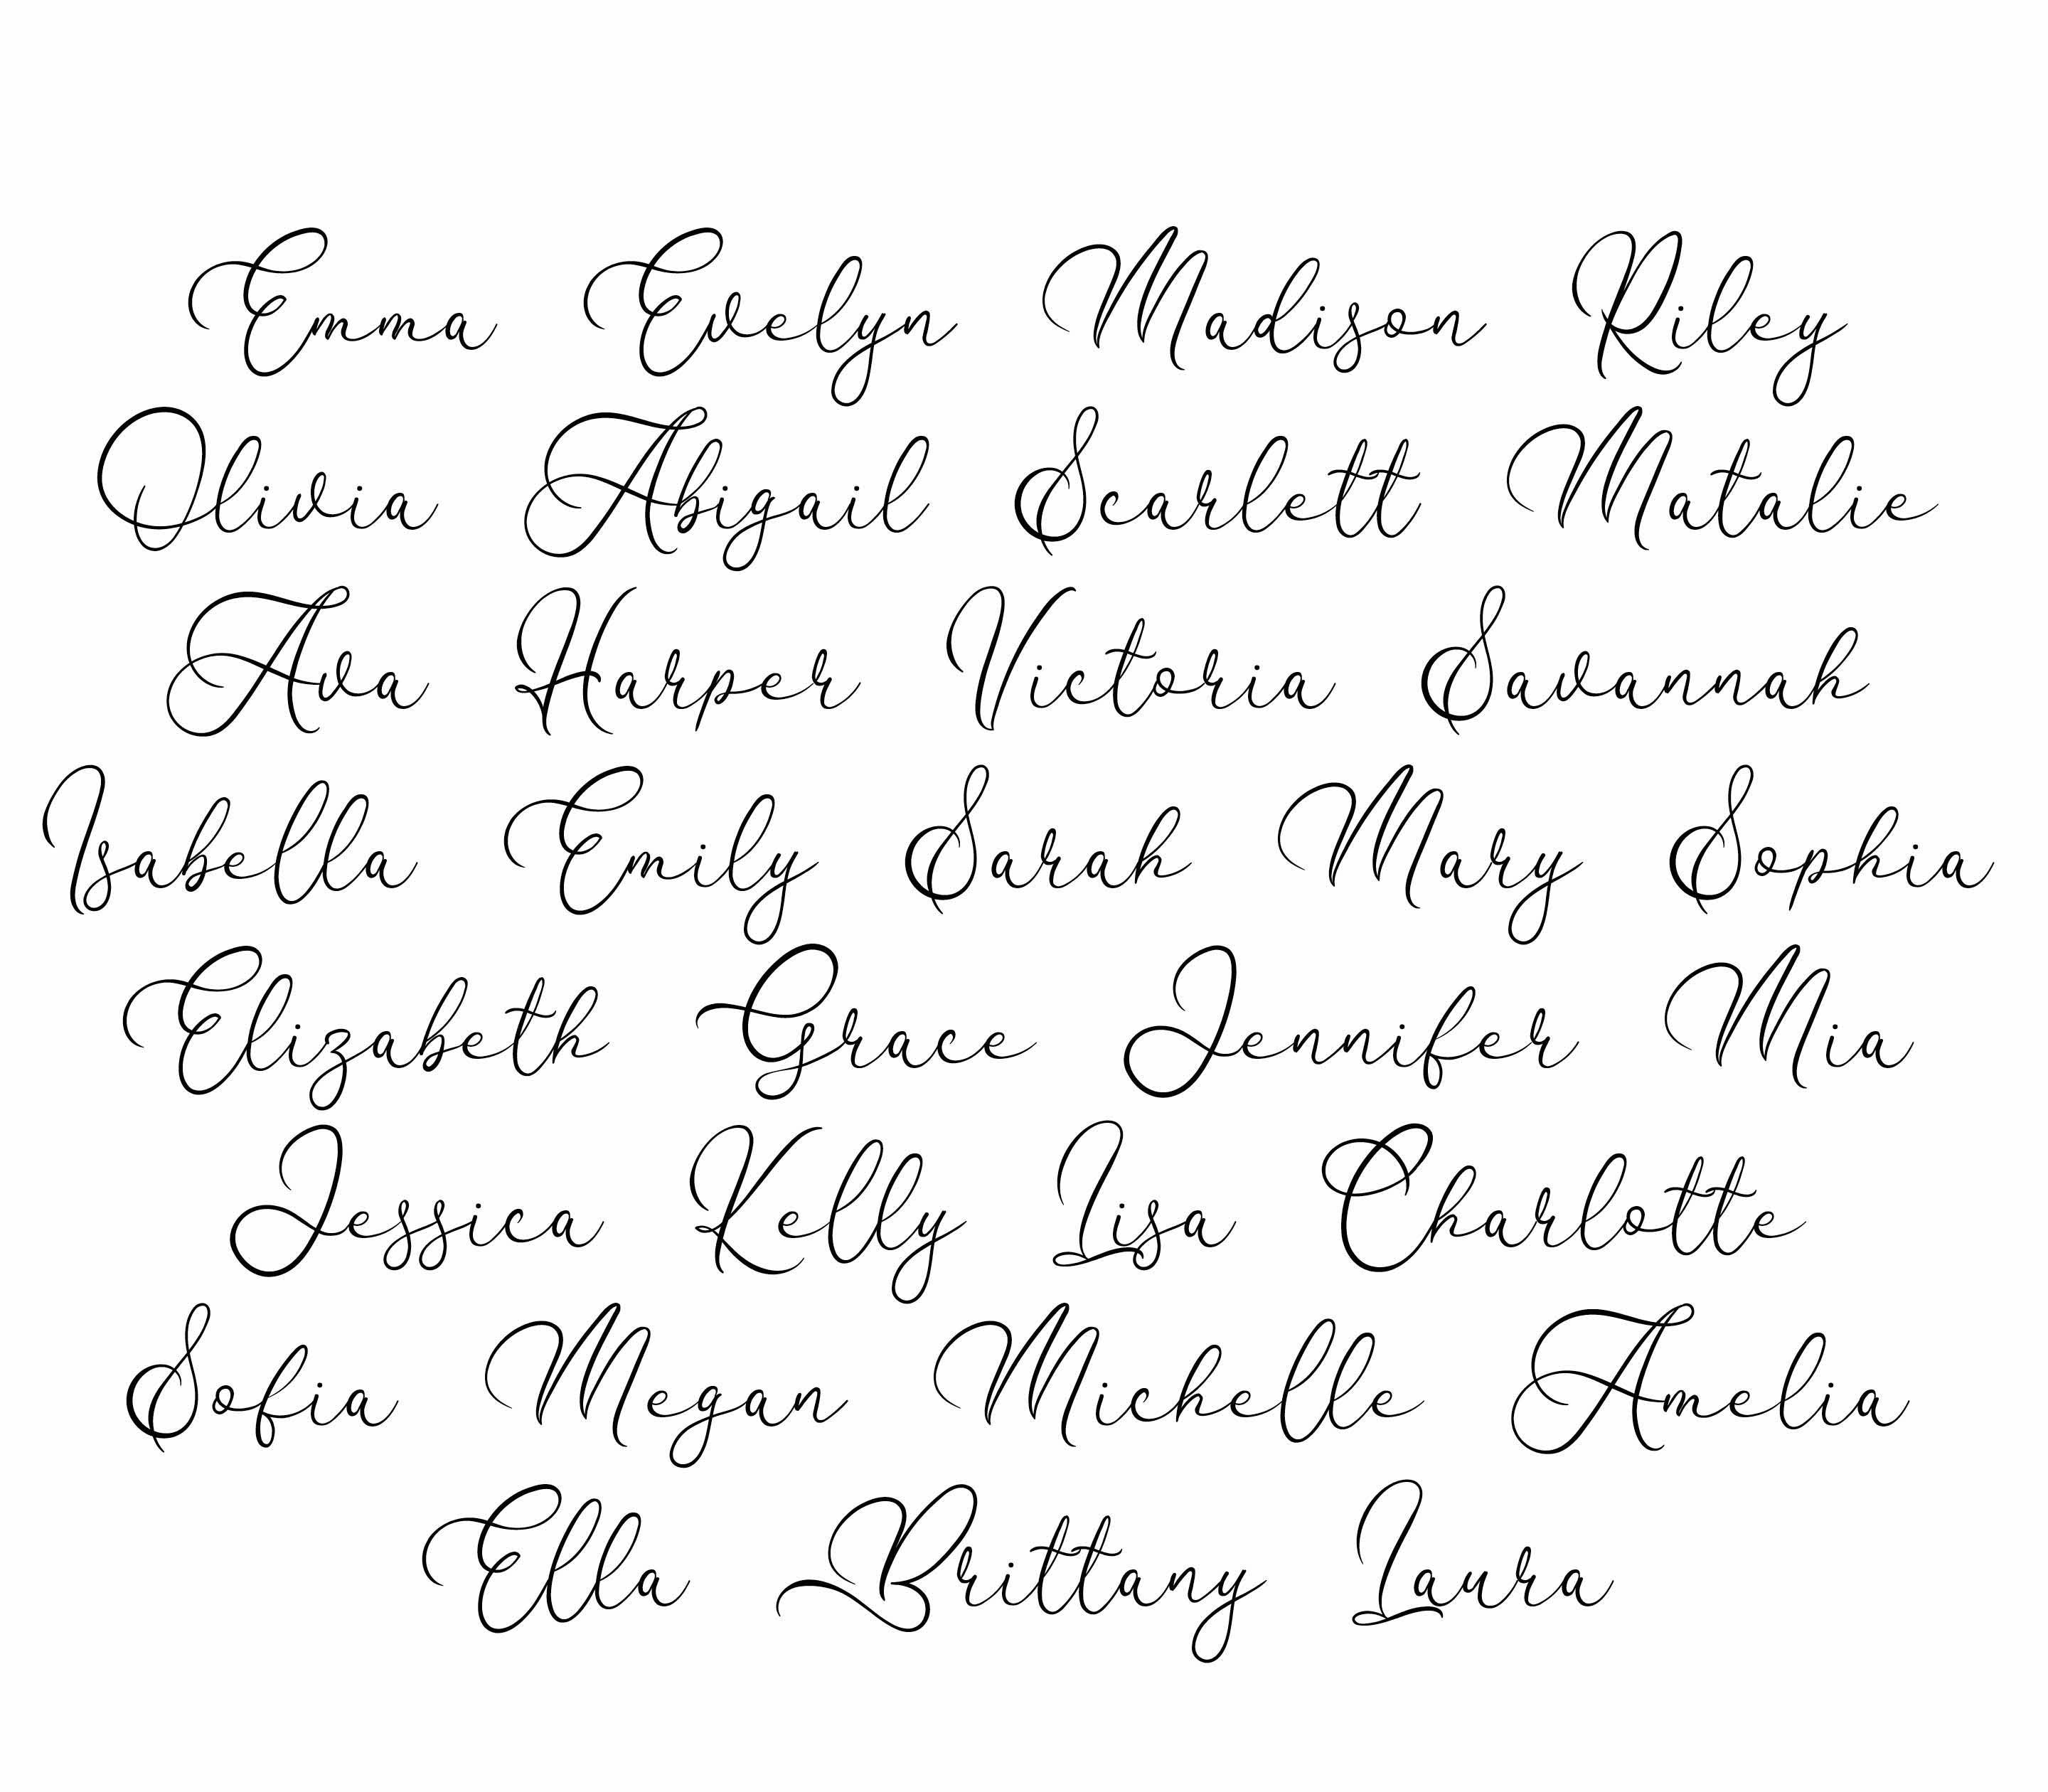 Personalized Name Decal Custom Name Decal Calligraphy Name | Etsy